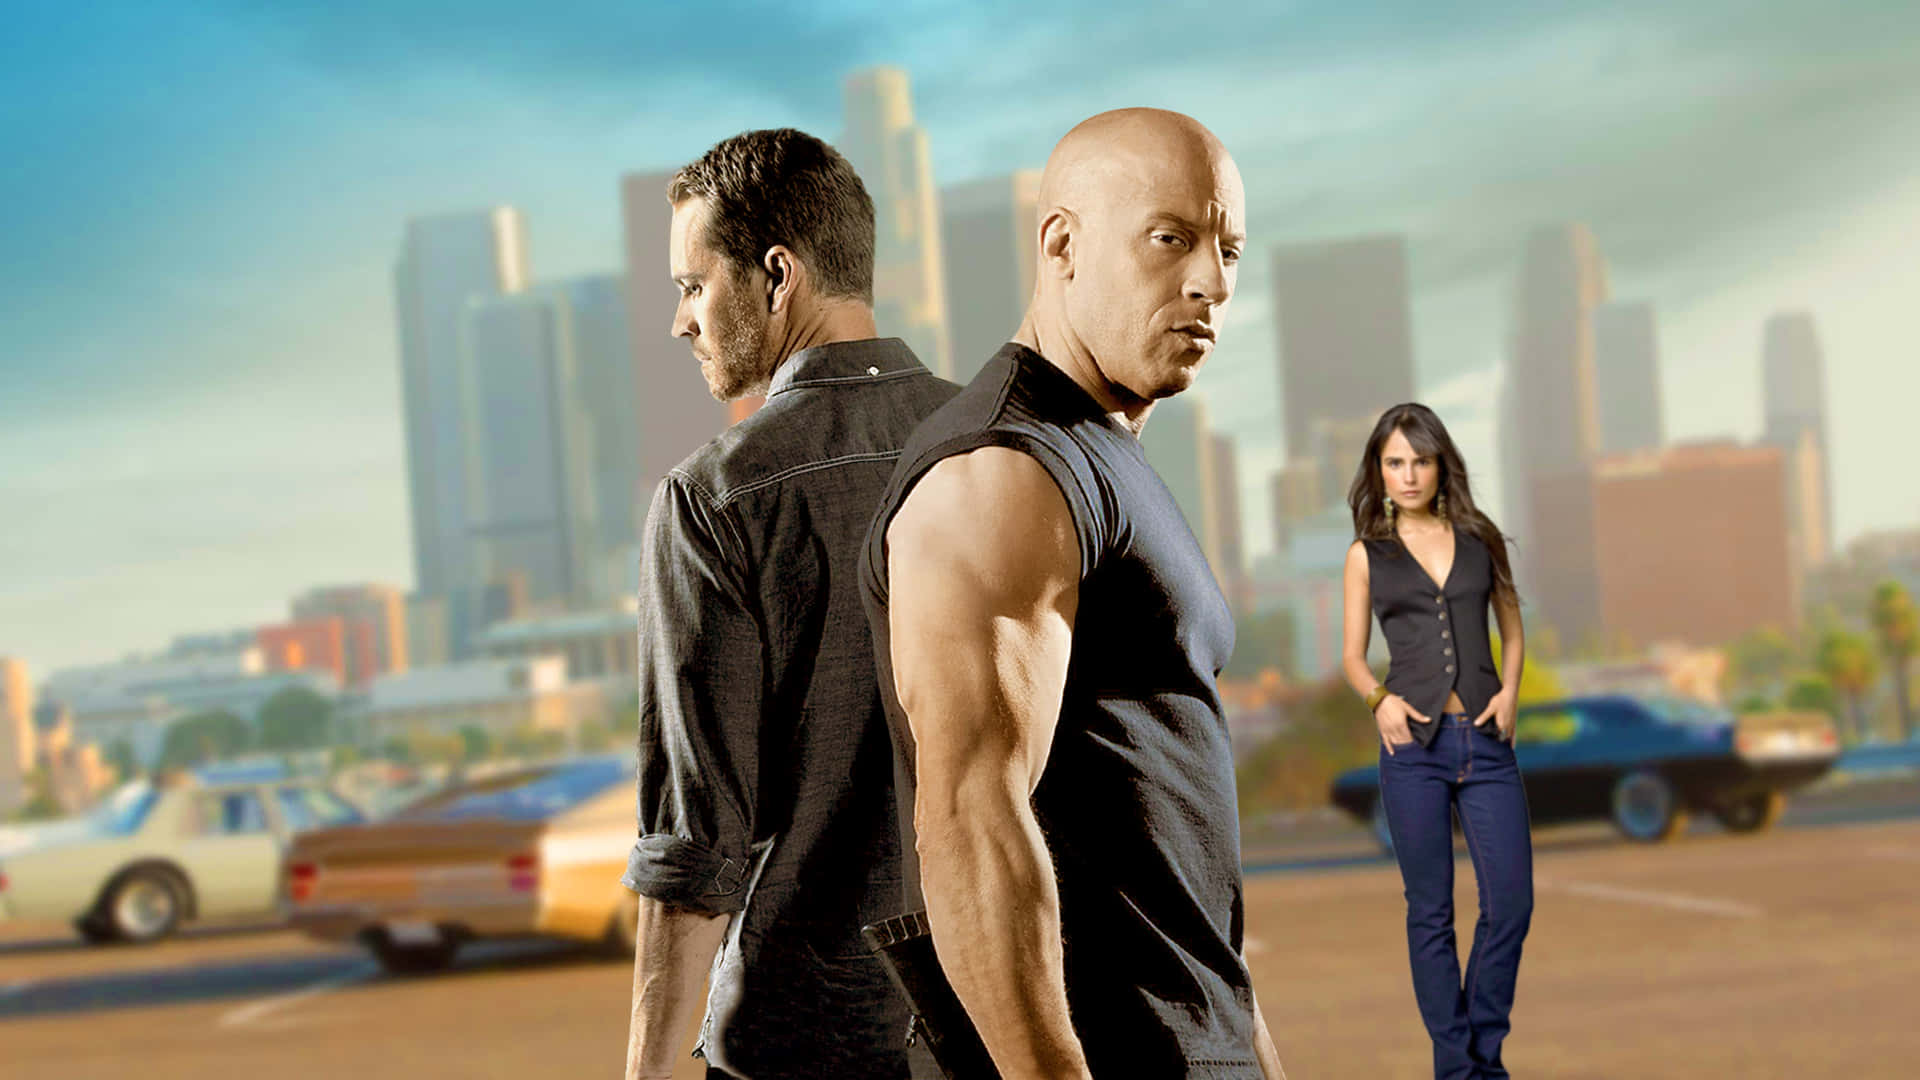 Cruise along and outrun the competition with Fast and Furious!